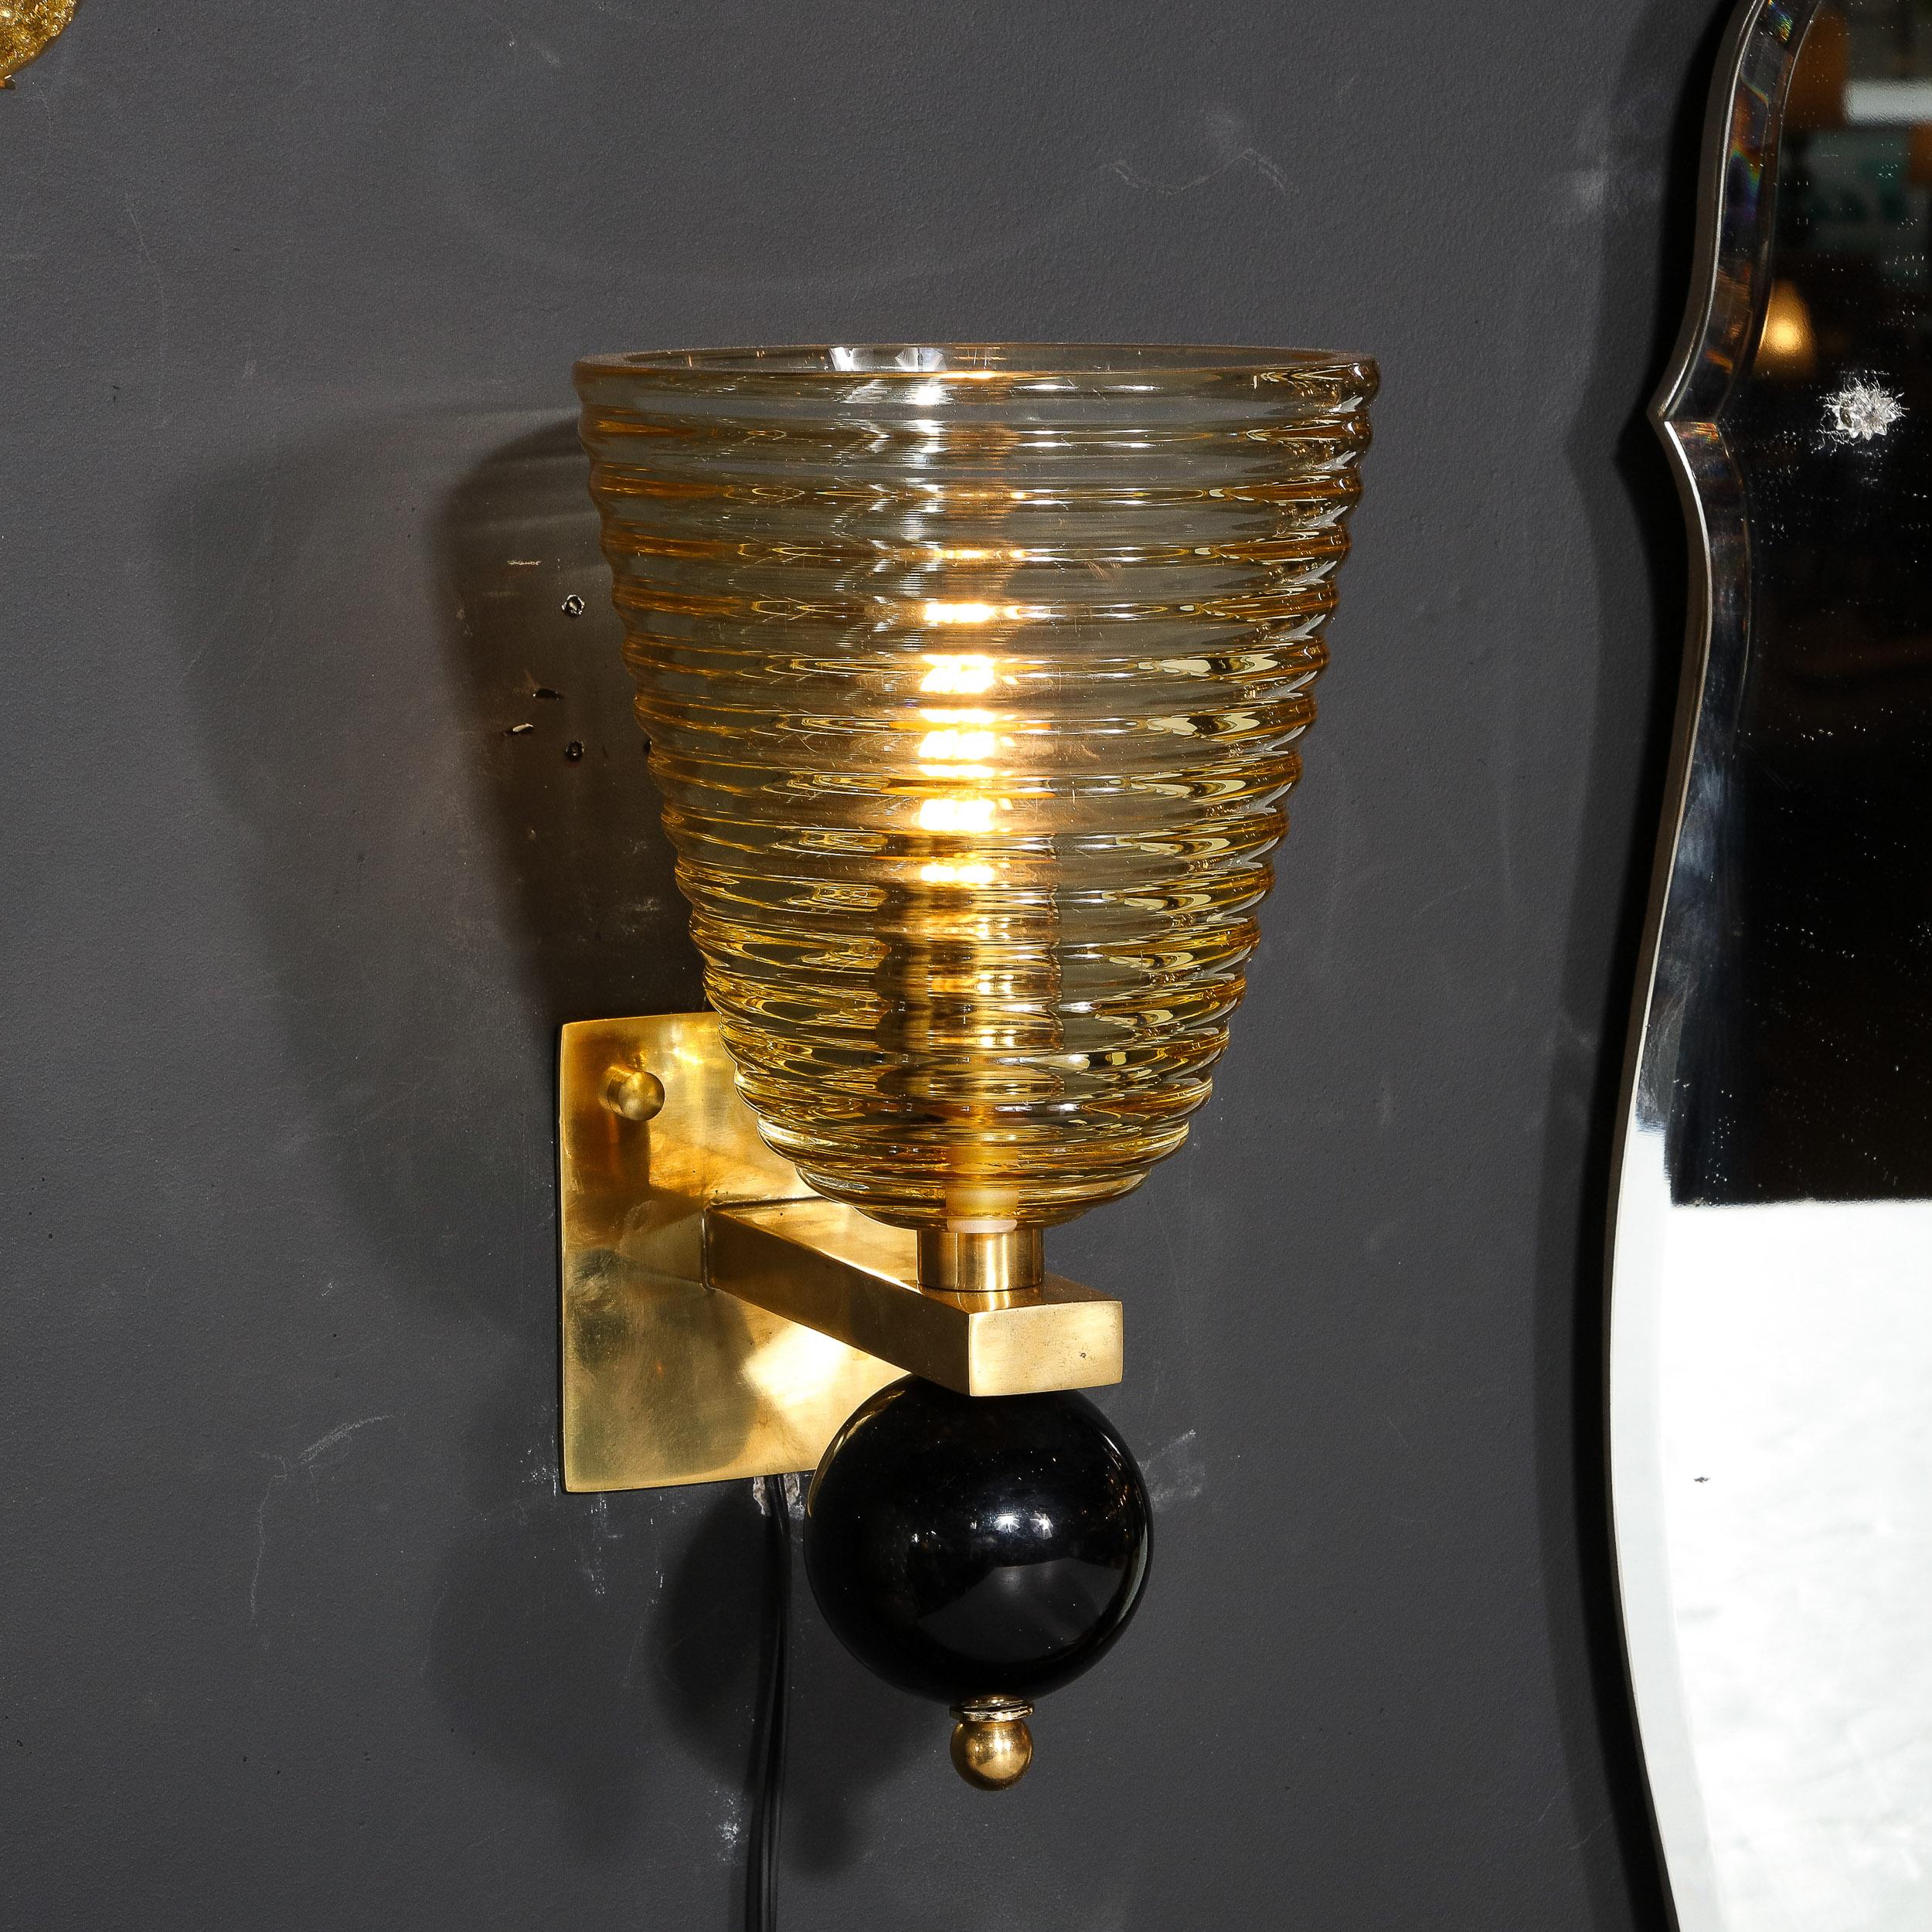 Pair of Modernist Hand-Blown Murano Hive Glass Form Sconces w/ Jet Black Orbital For Sale 3